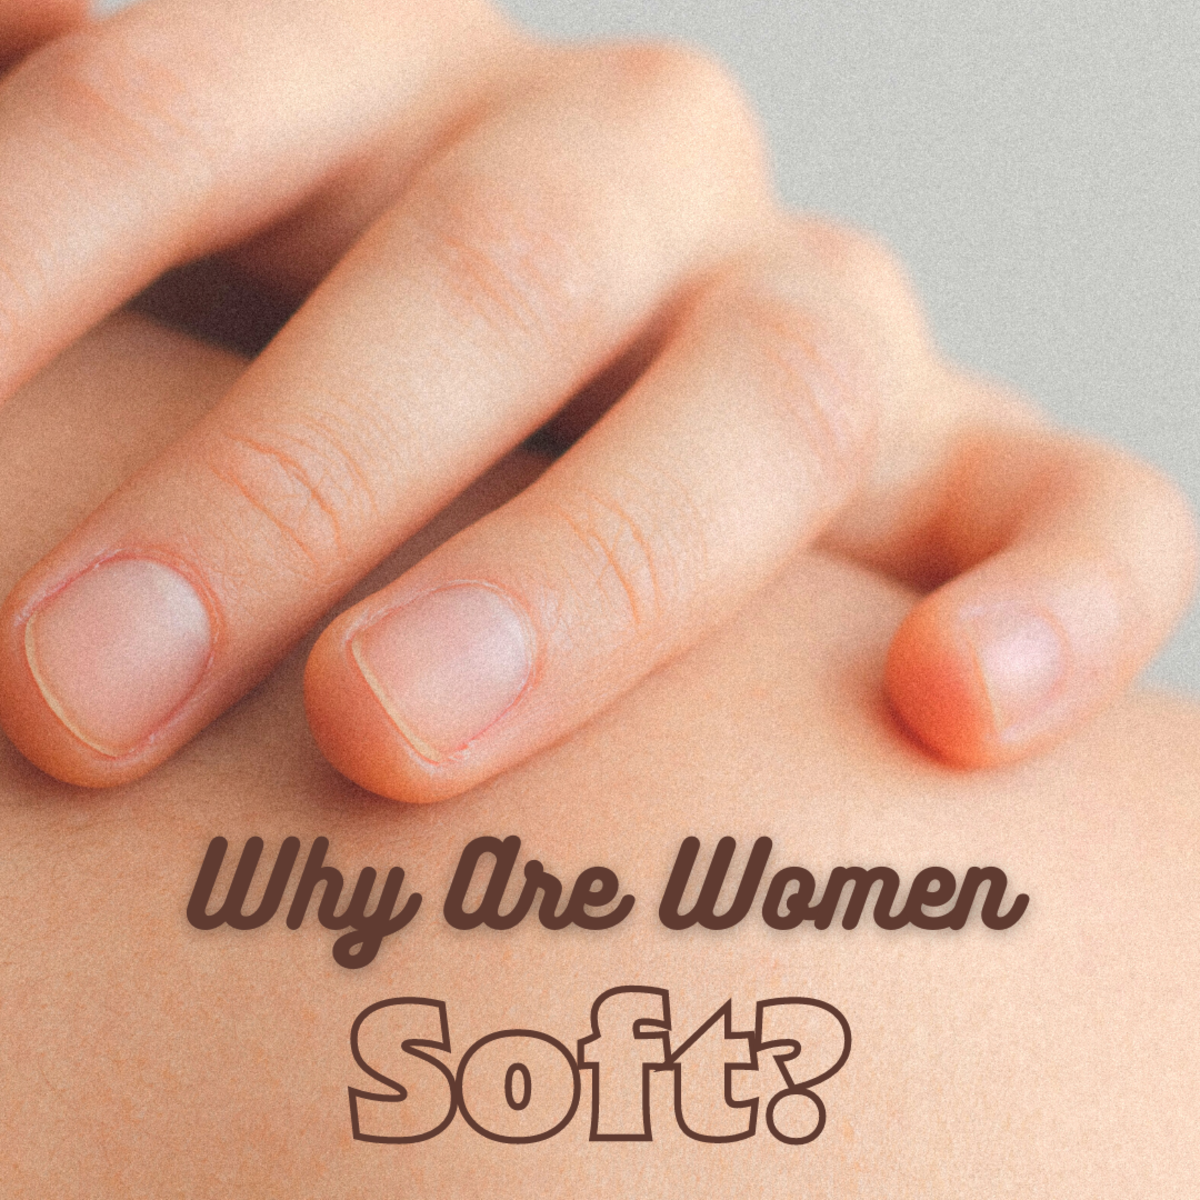 Why are women softer than men?